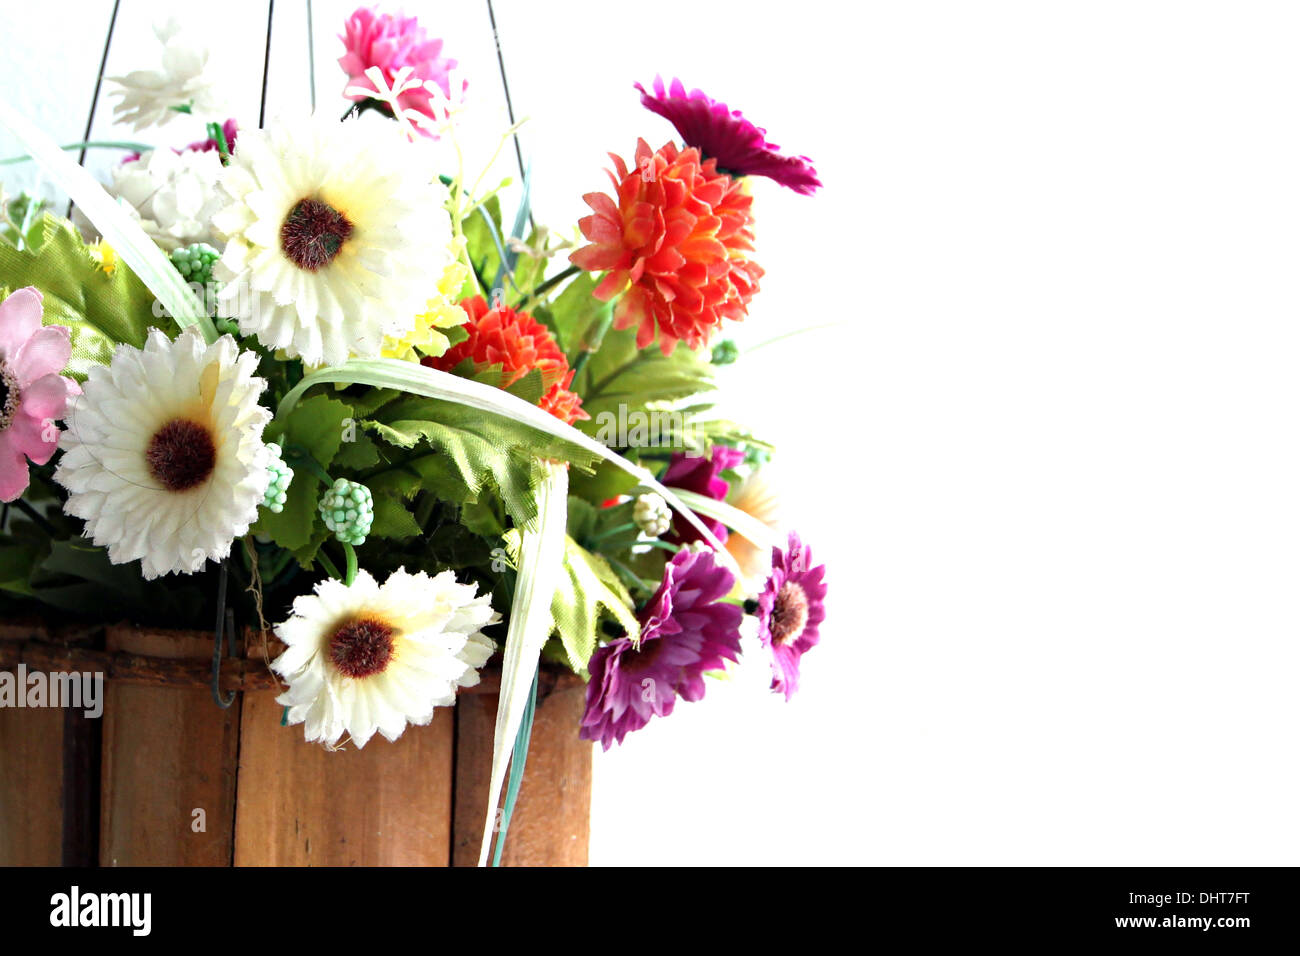 Colorful flowers in a wooden basket and it was hanging out. Stock Photo